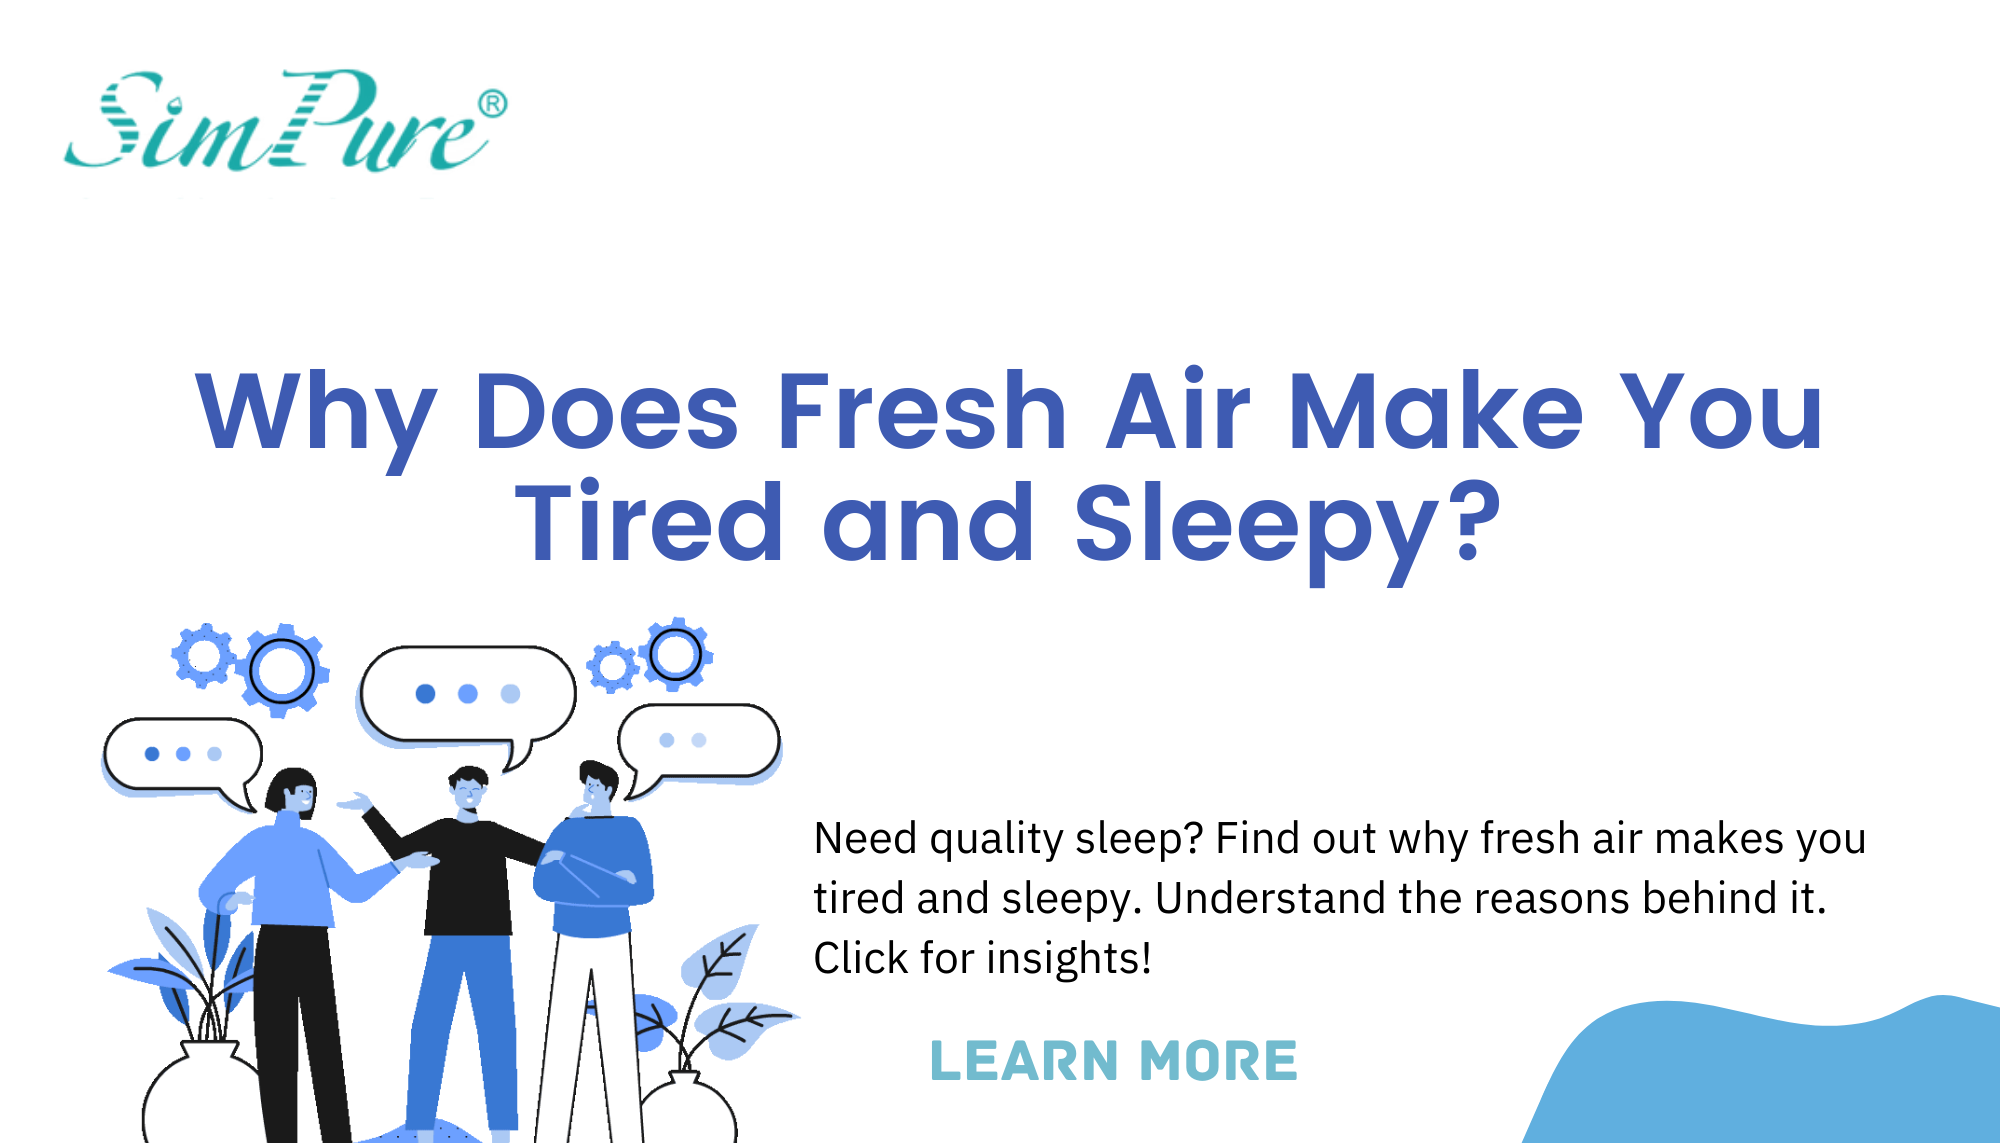 Why Does Fresh Air Make You Tired and Sleepy?